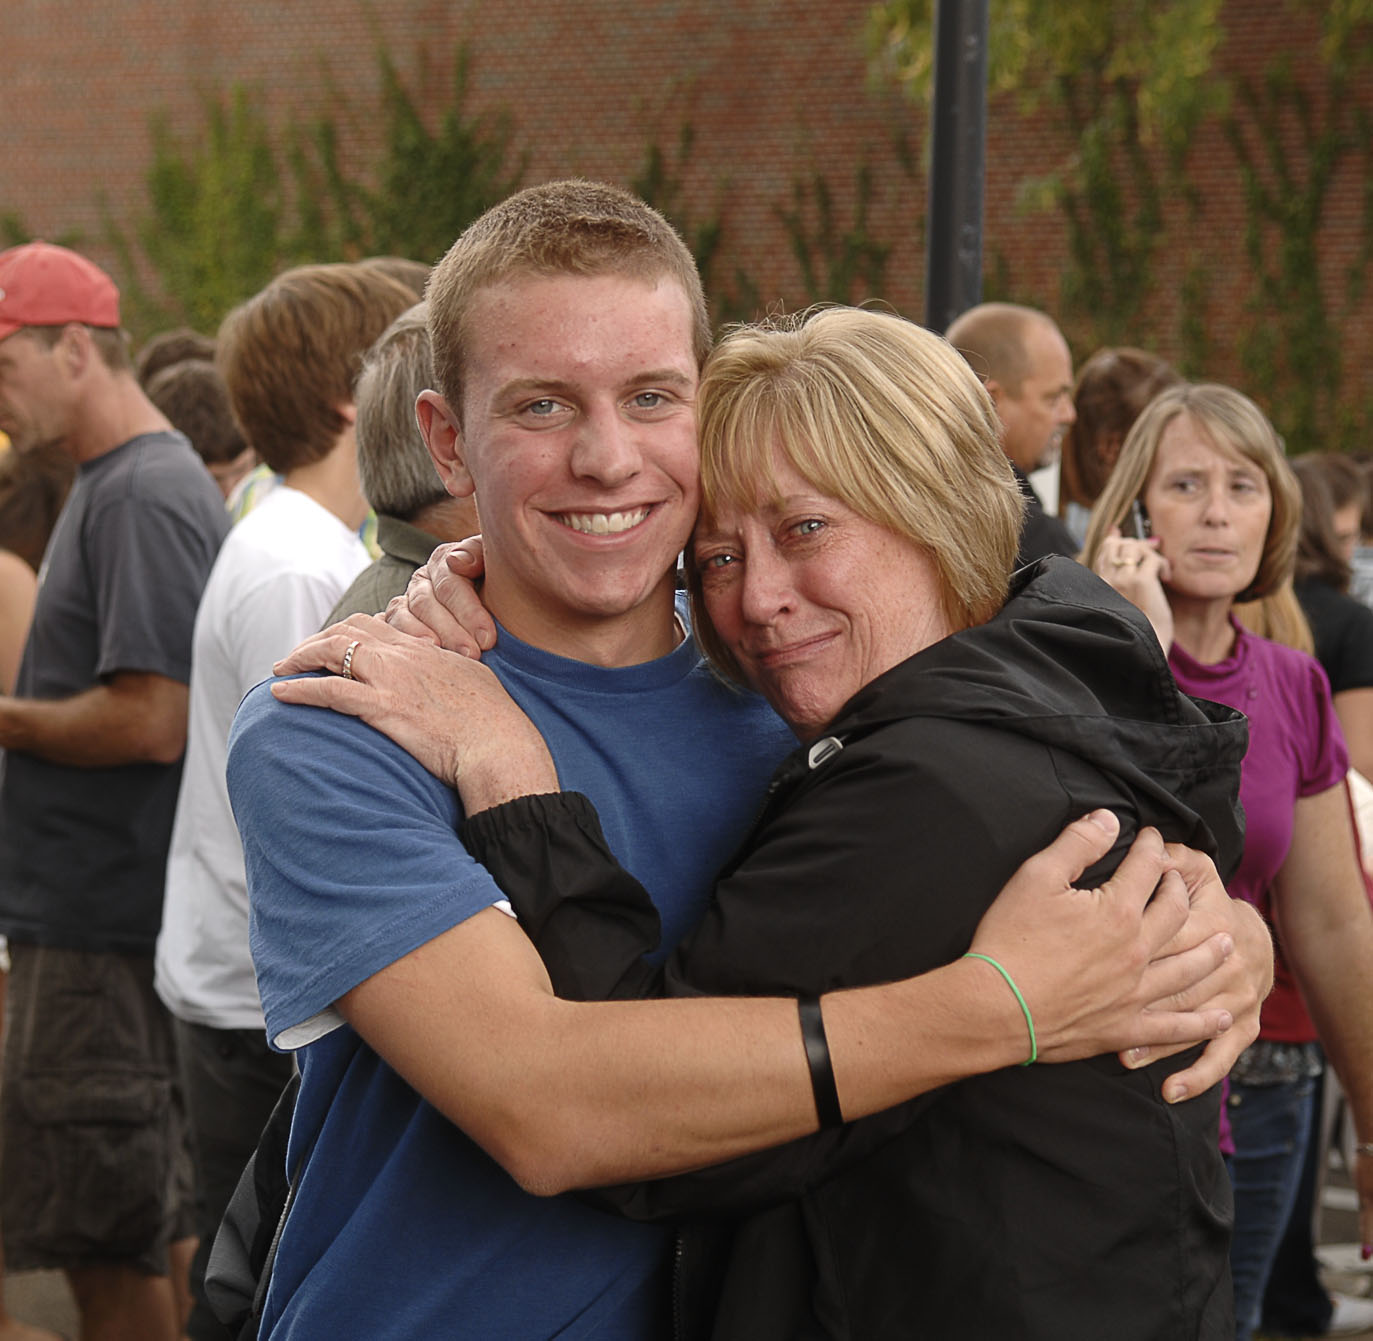 two people hug and smile in front of crowd